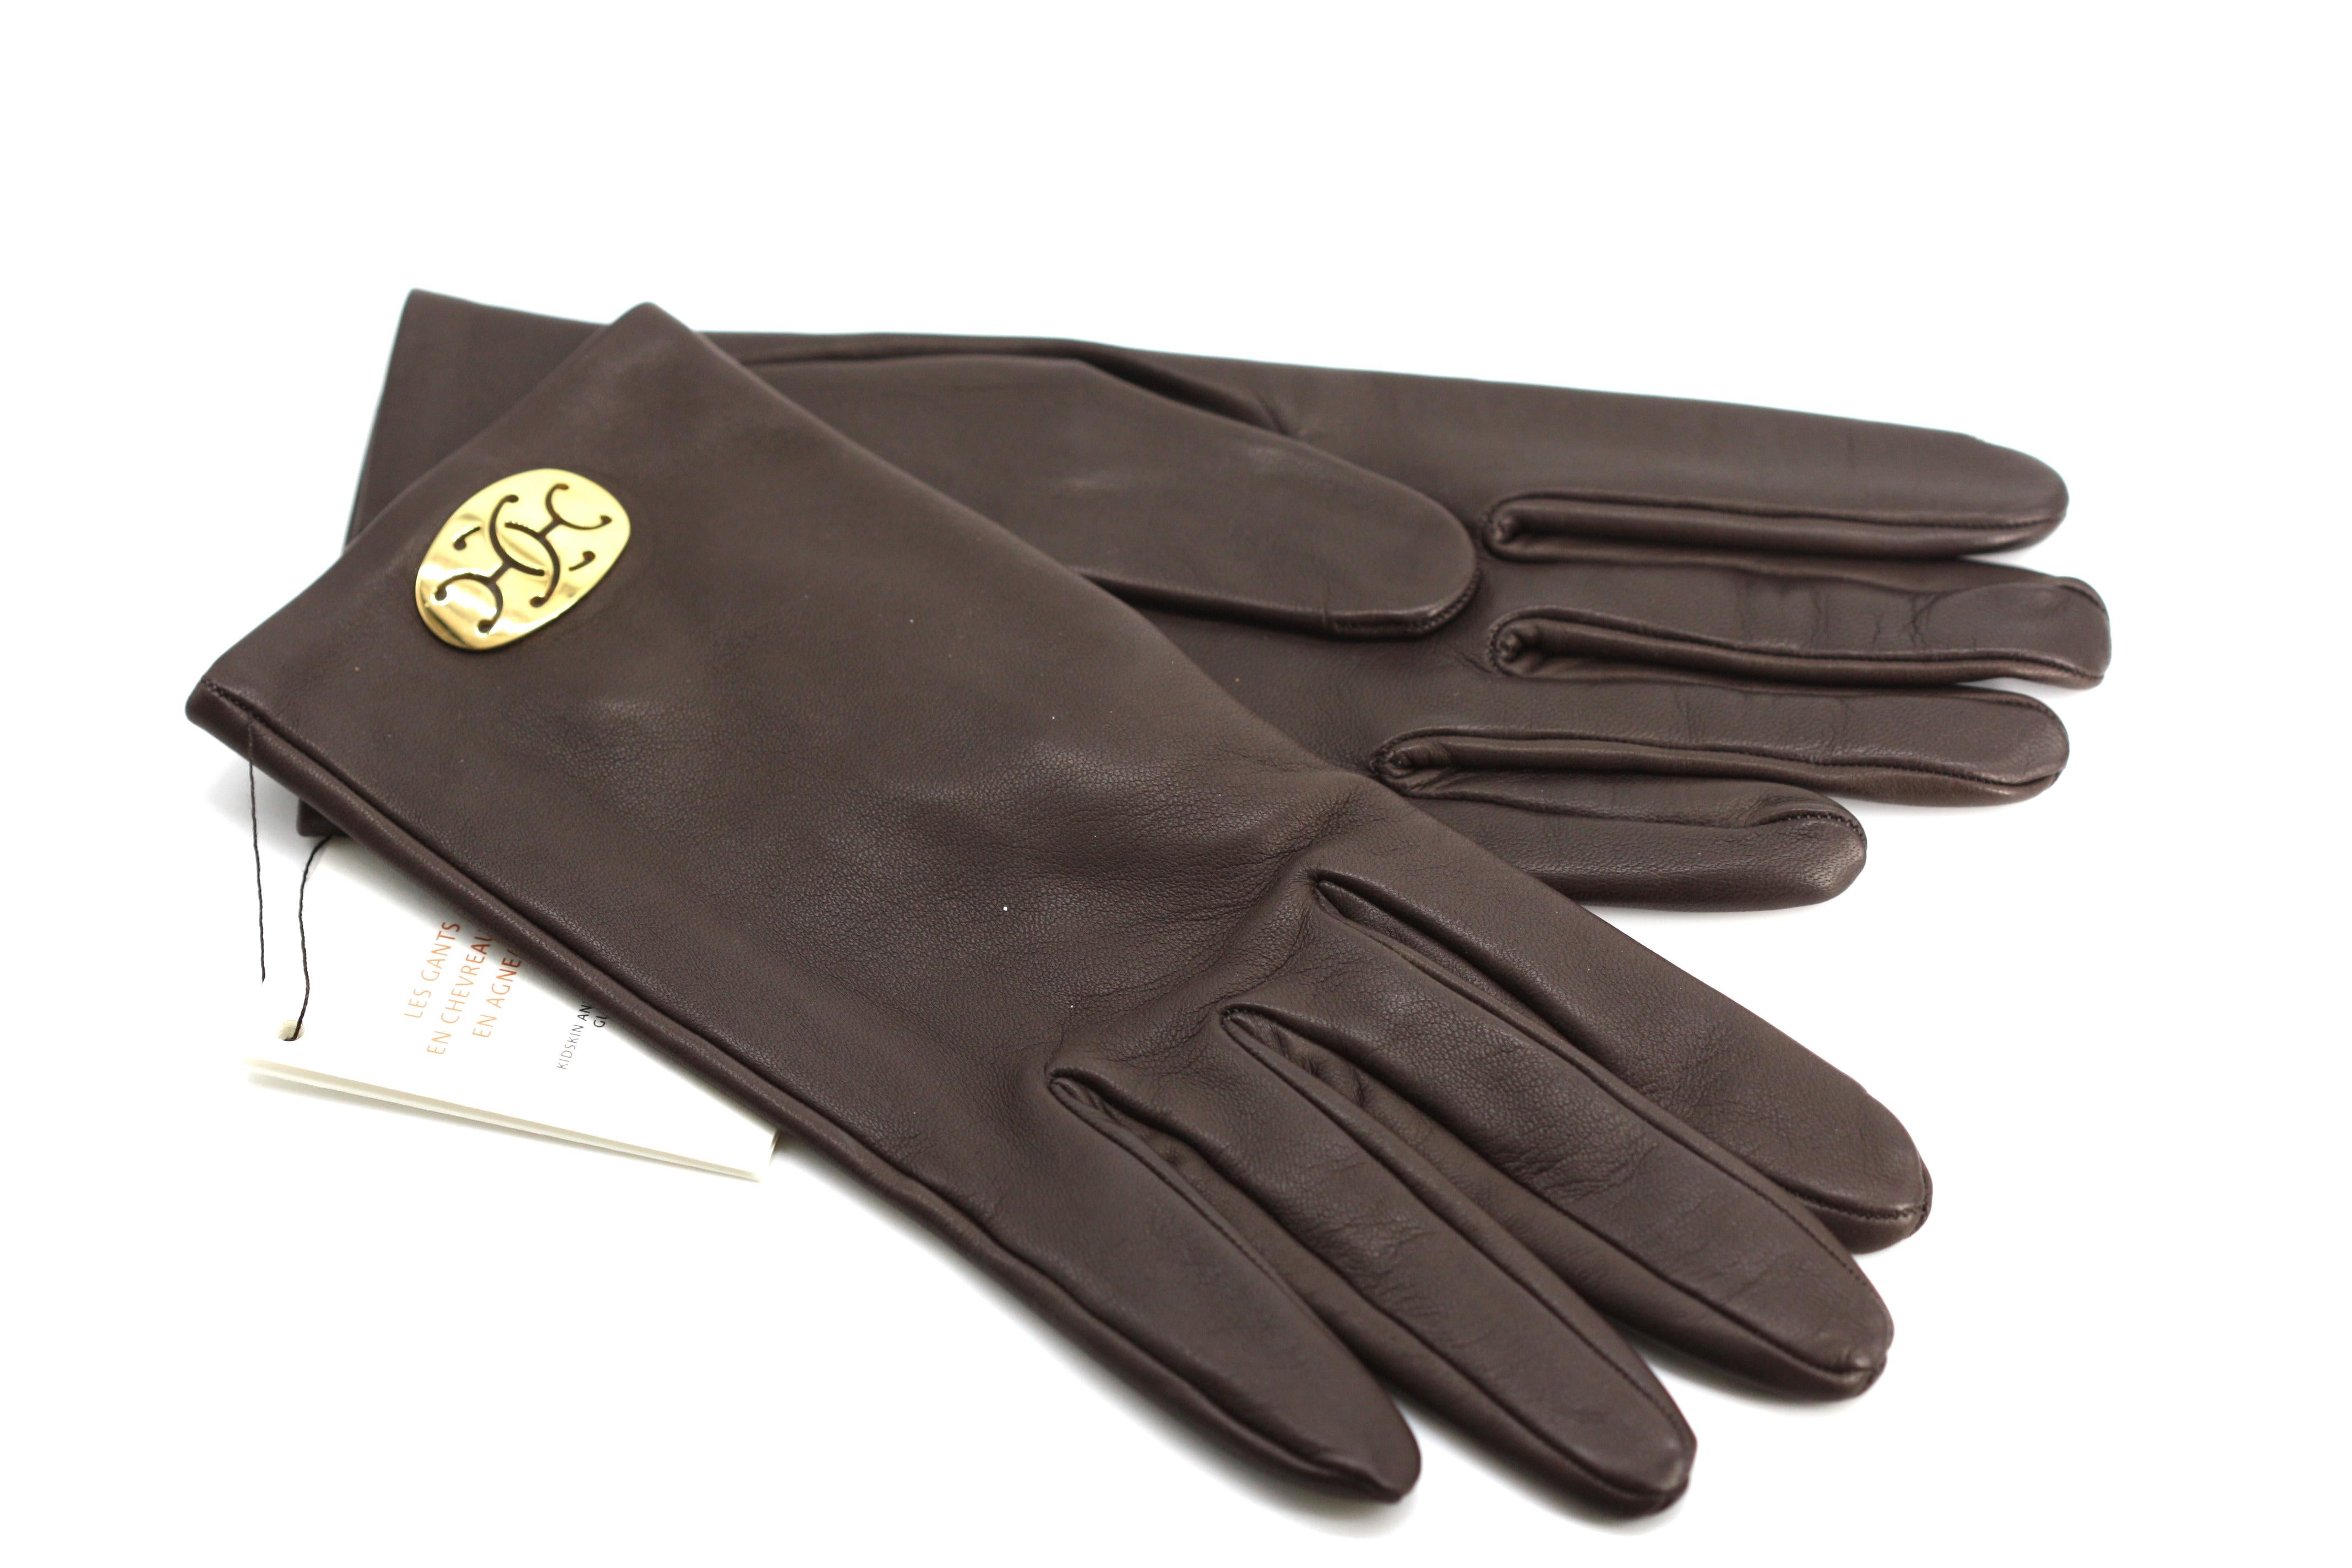 Pair of Hermès Ladies Les Gants en Chevreau et Agneau, (kid and lamb gloves)
Chocolate brown leather with gold toned metal clasp, size 8.5, with Hermes tag and box, never worn.
Condition Report
Excellent condition.